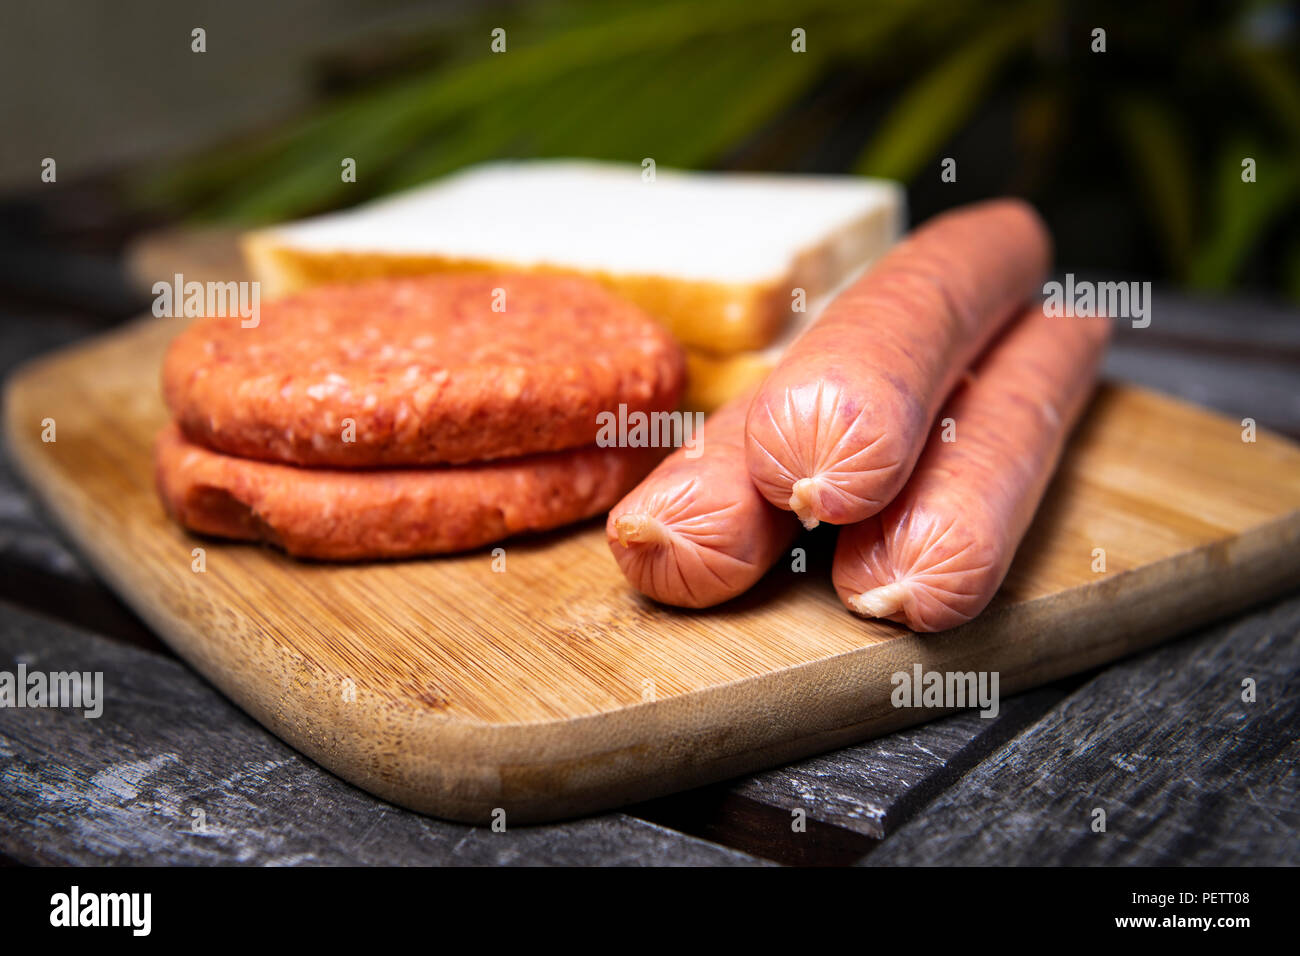 Fresh uncooked barbecue sausages, burgers and bread ready to be grilled, on wooden chopping board Stock Photo